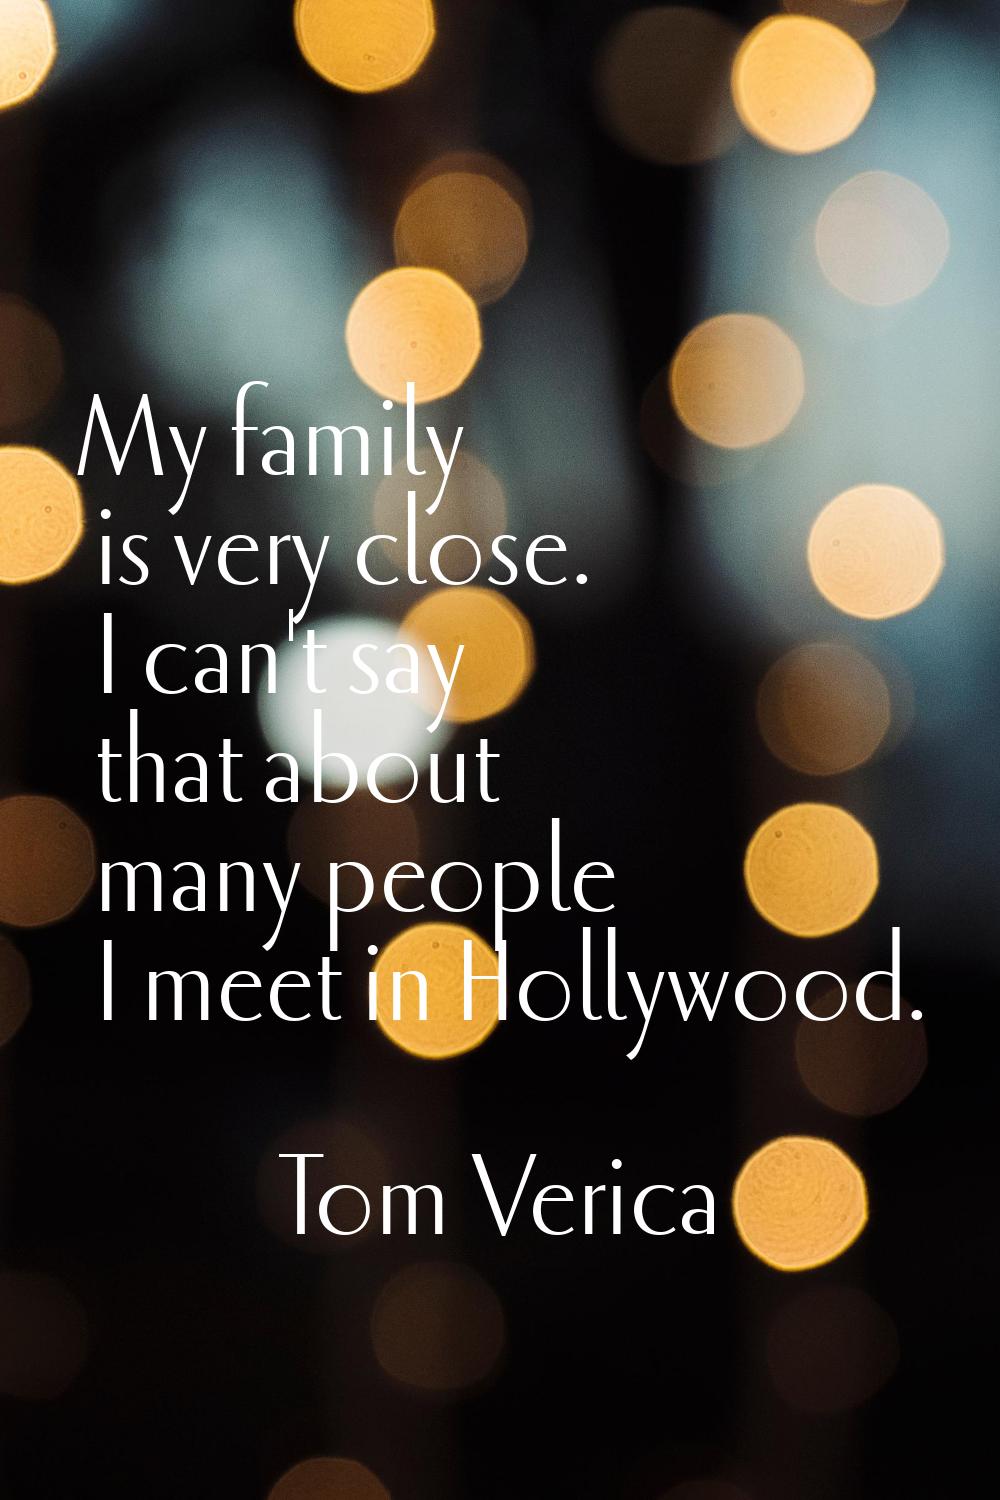 My family is very close. I can't say that about many people I meet in Hollywood.